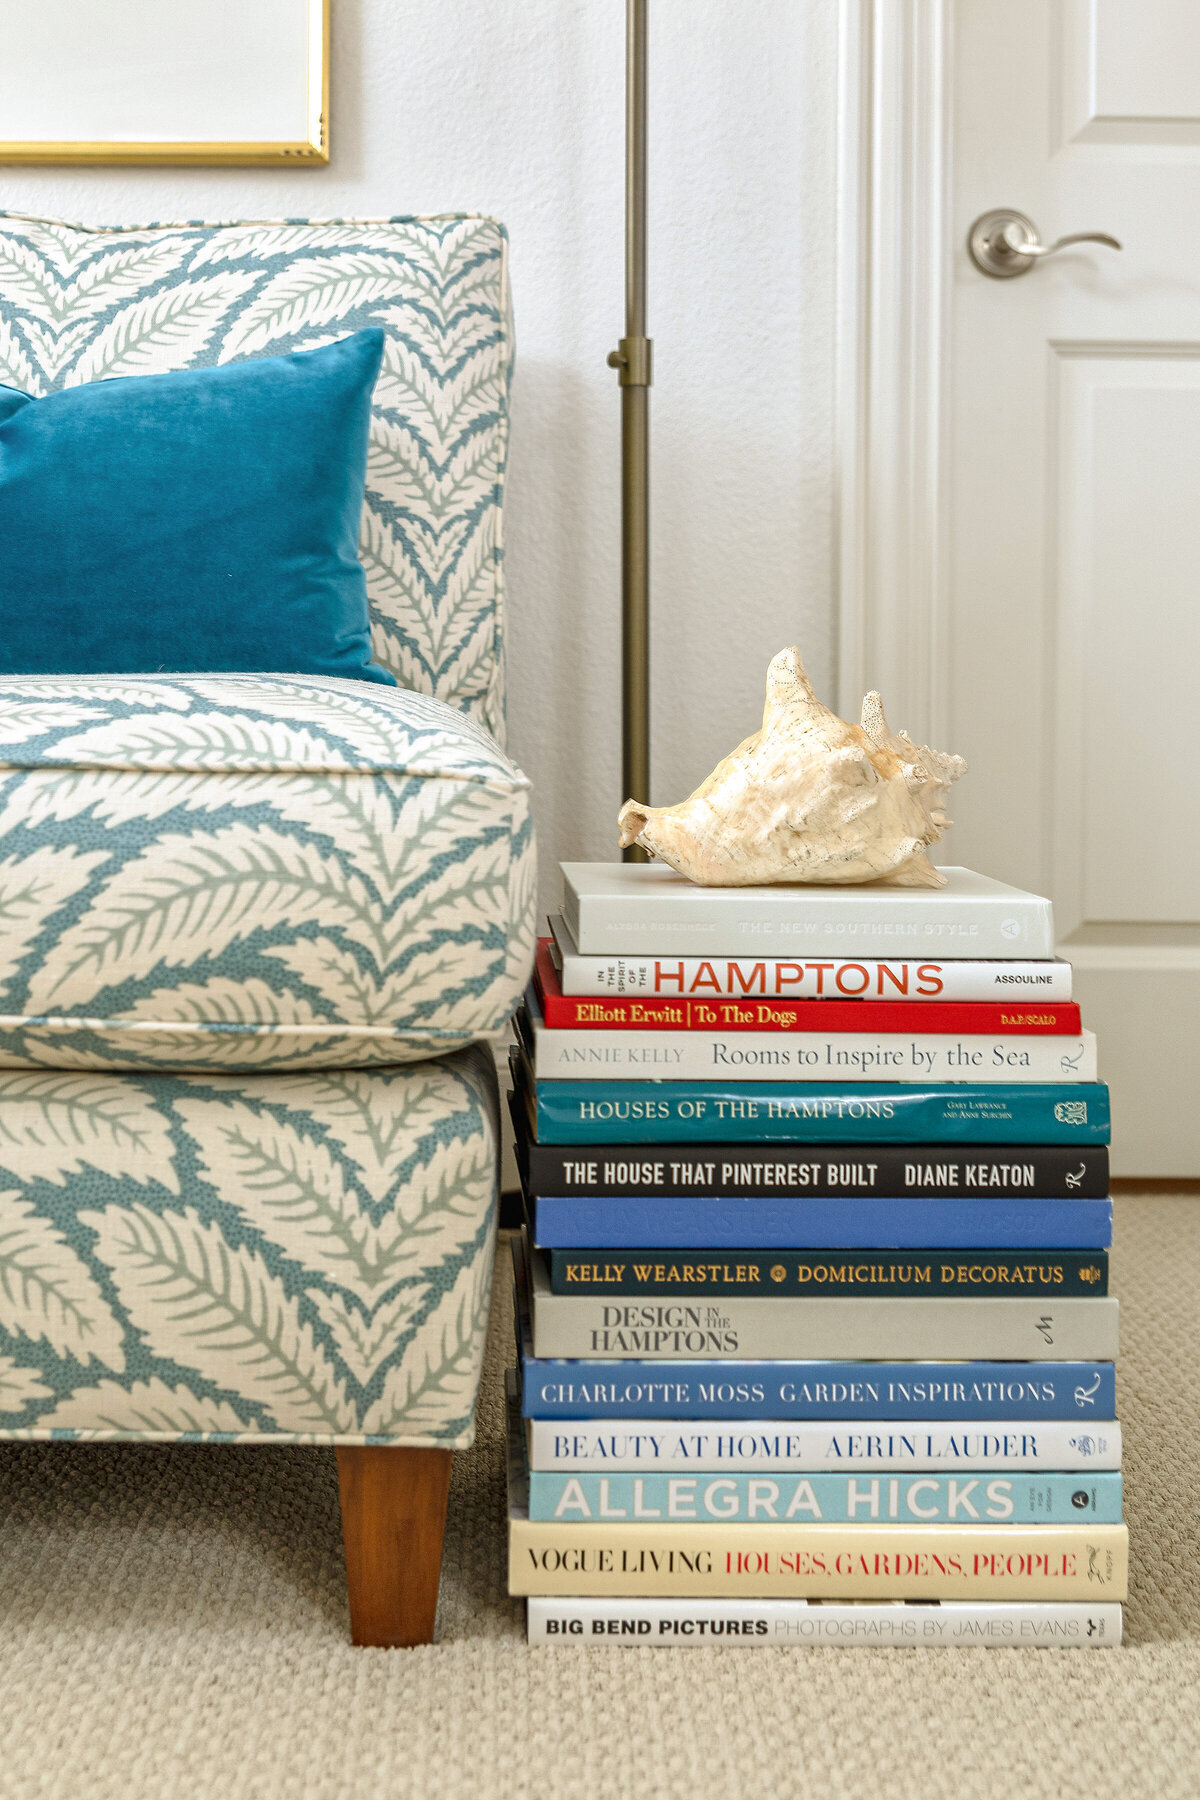 Blue lounge chair with pattern fabric  and blue velvet accent pillow . Coffee table books stacked with seashell on top